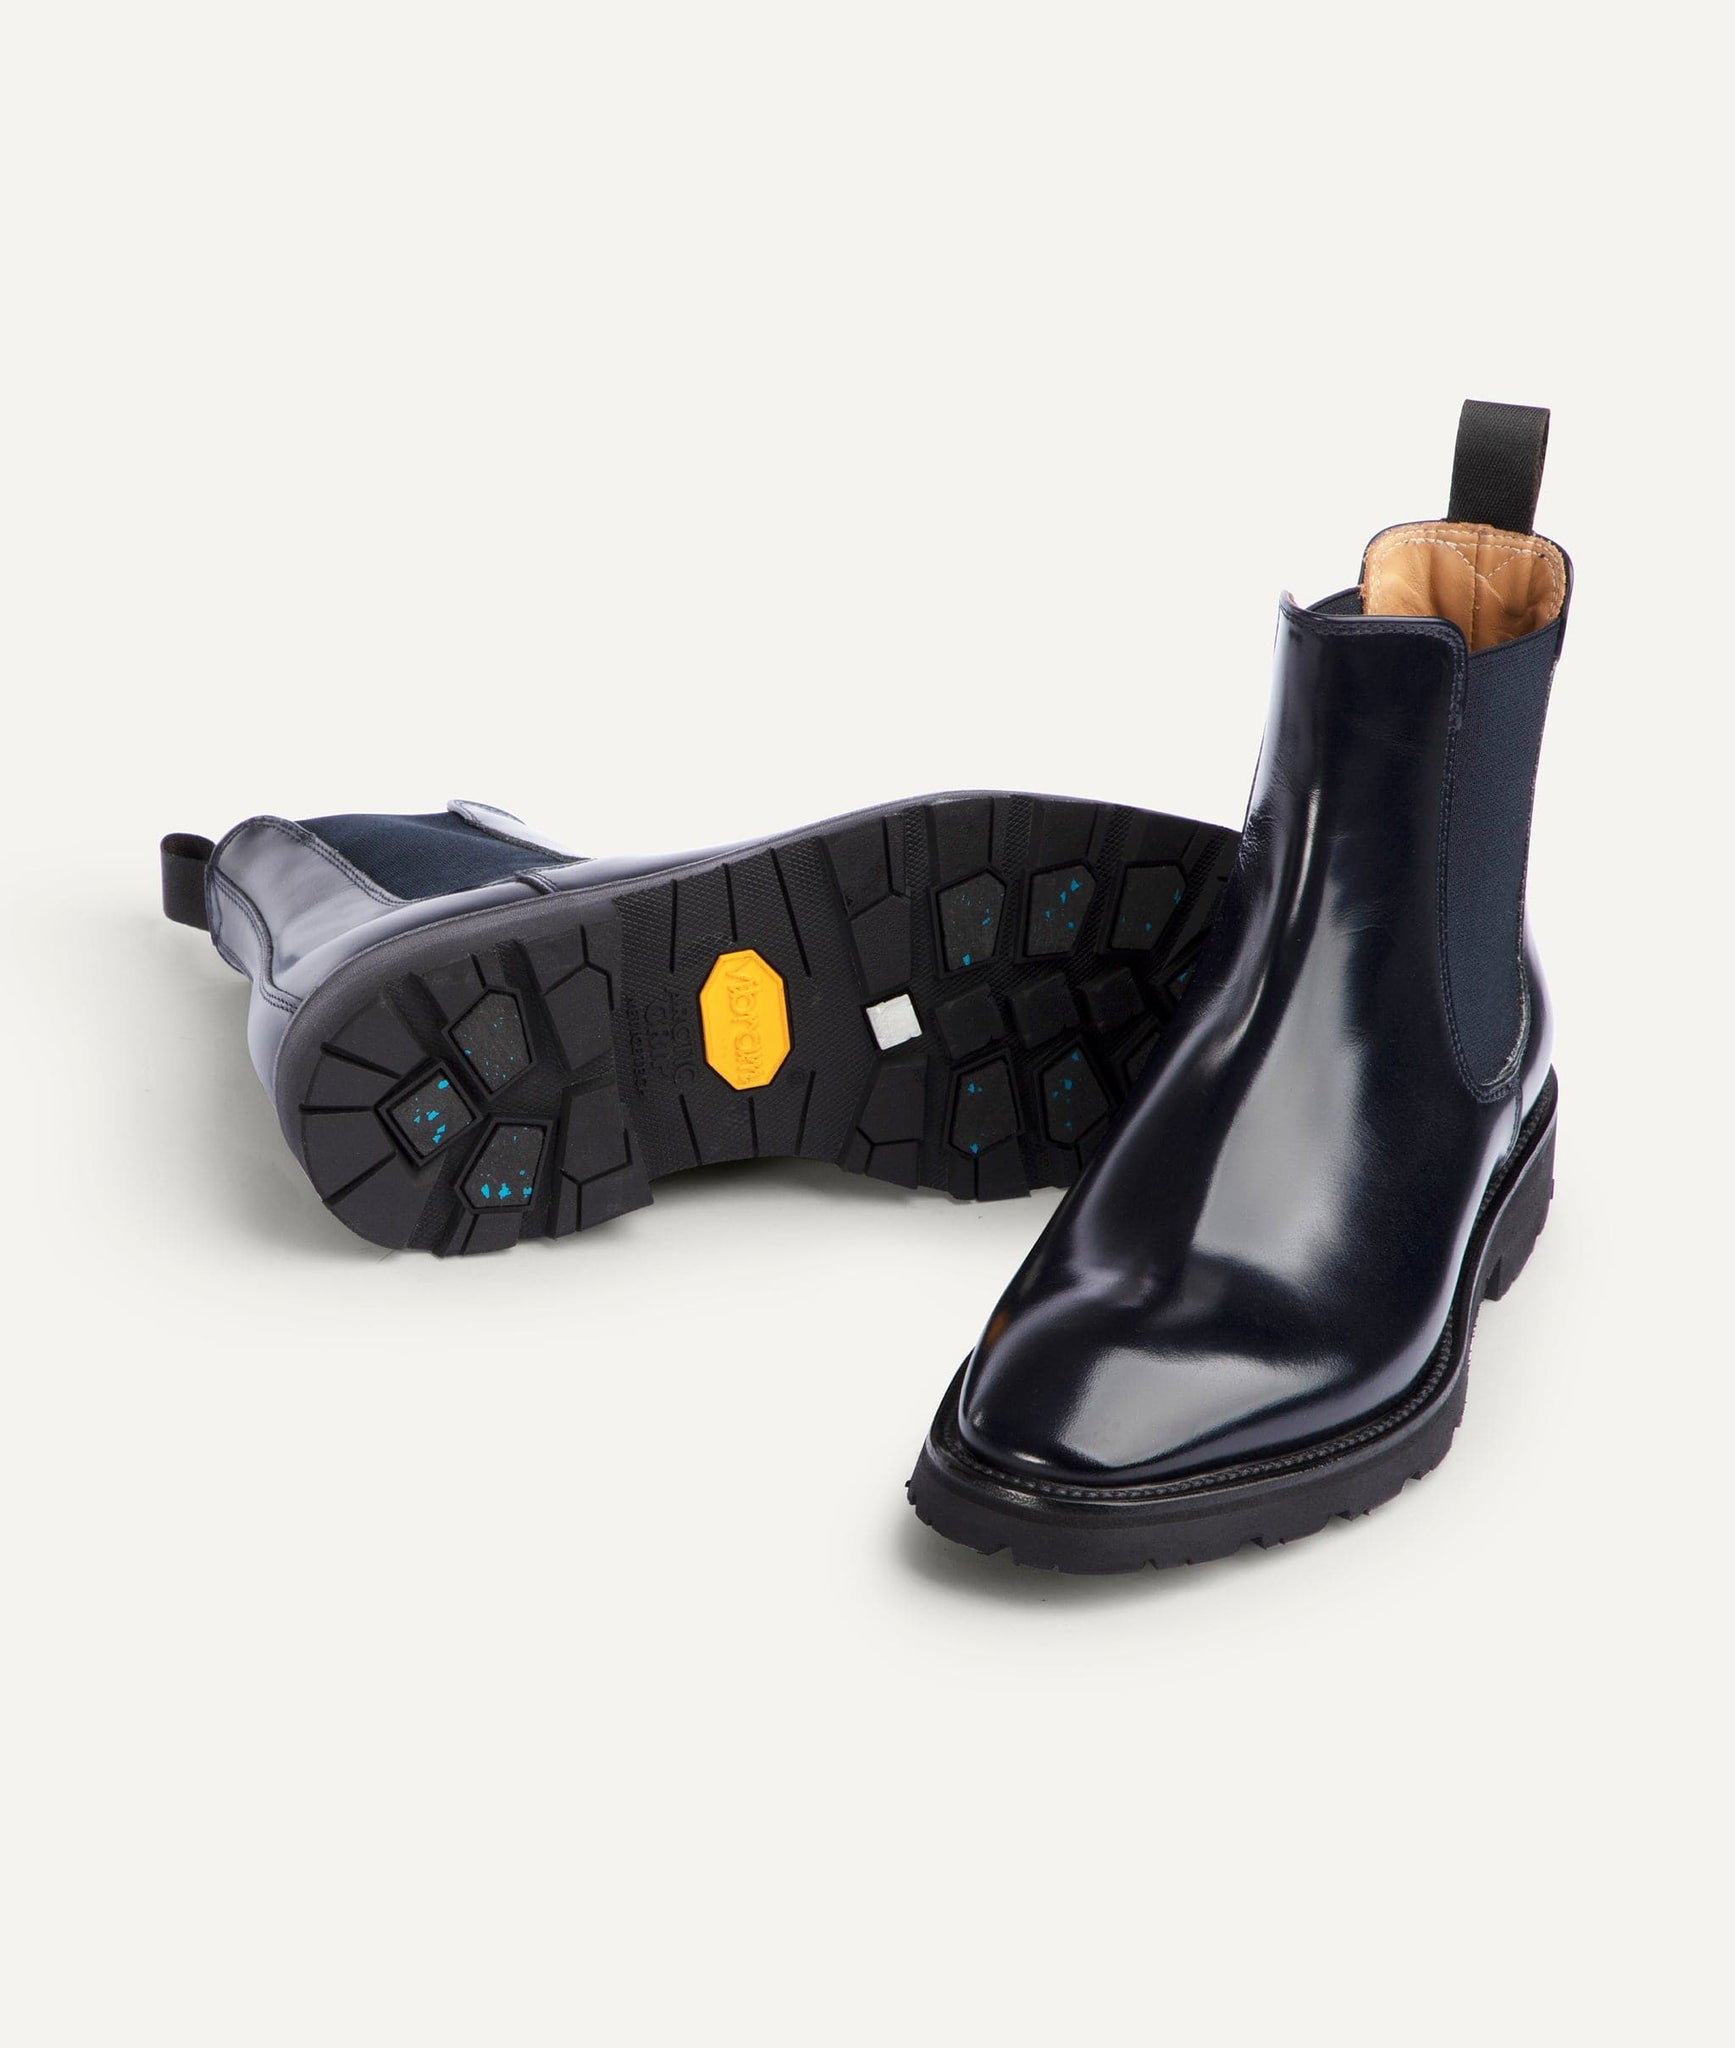 City Chelsea Boot in Calf Leather